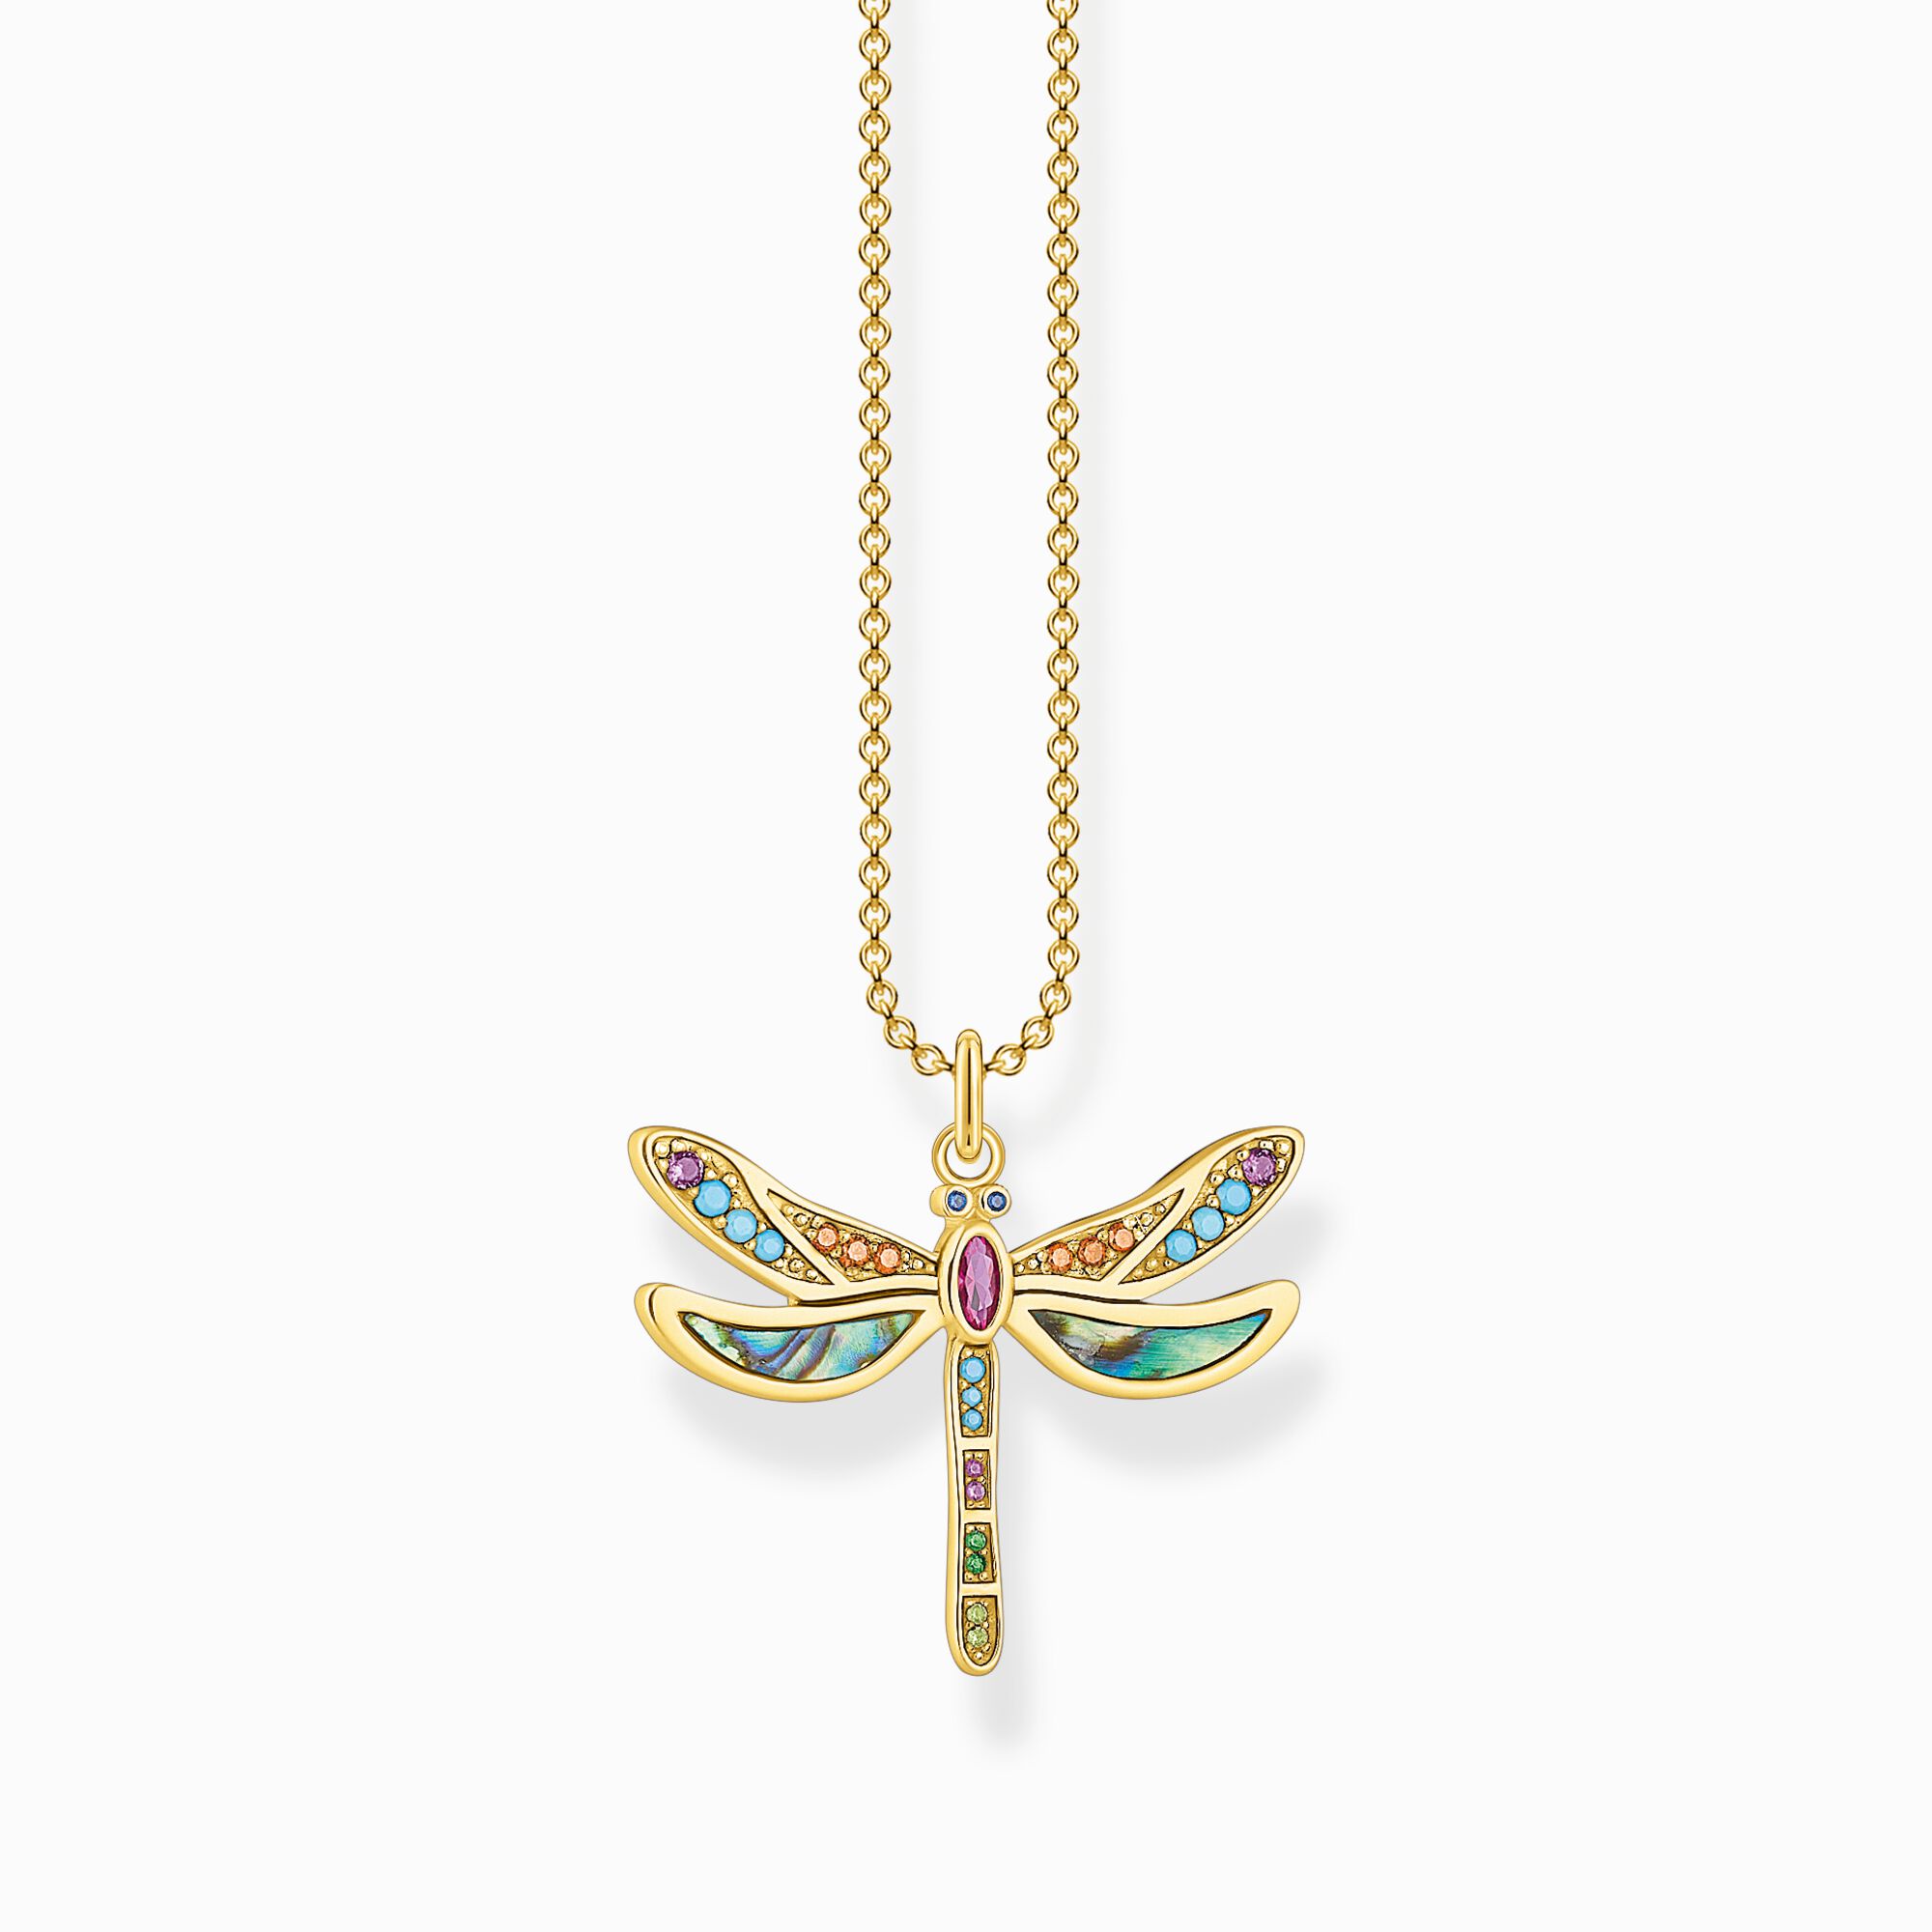 Dragonfly Necklace On Rope Chain